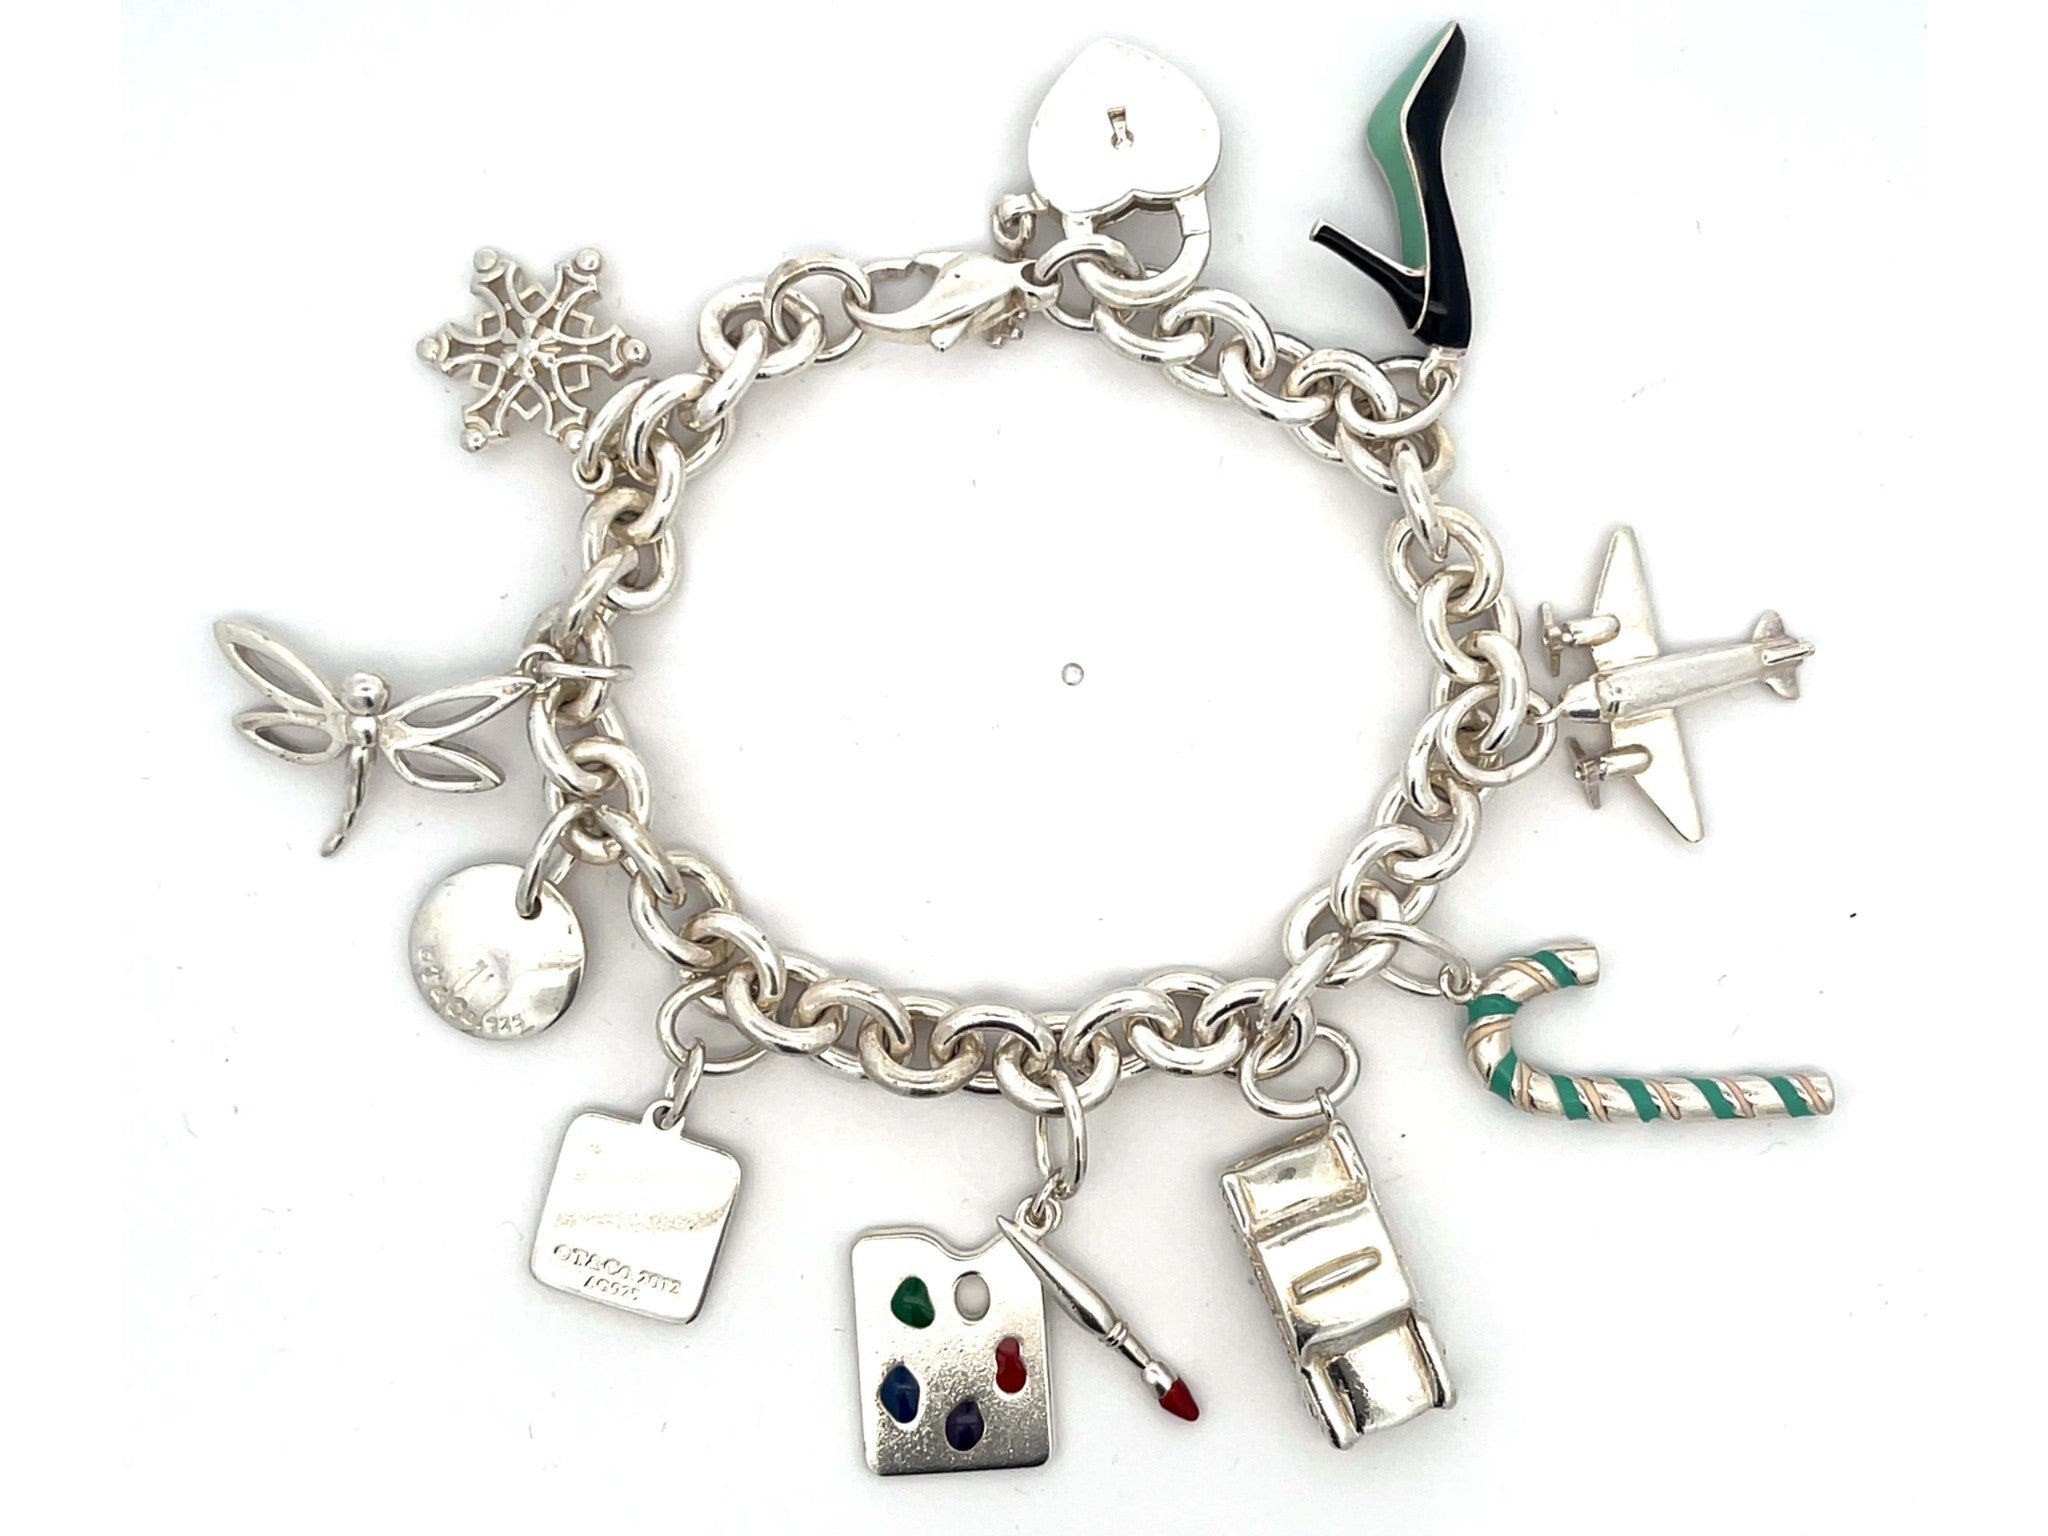 RARE Tiffany and Co. Art Palette Airplane Taxi Charm Bracelet Sterling Silver